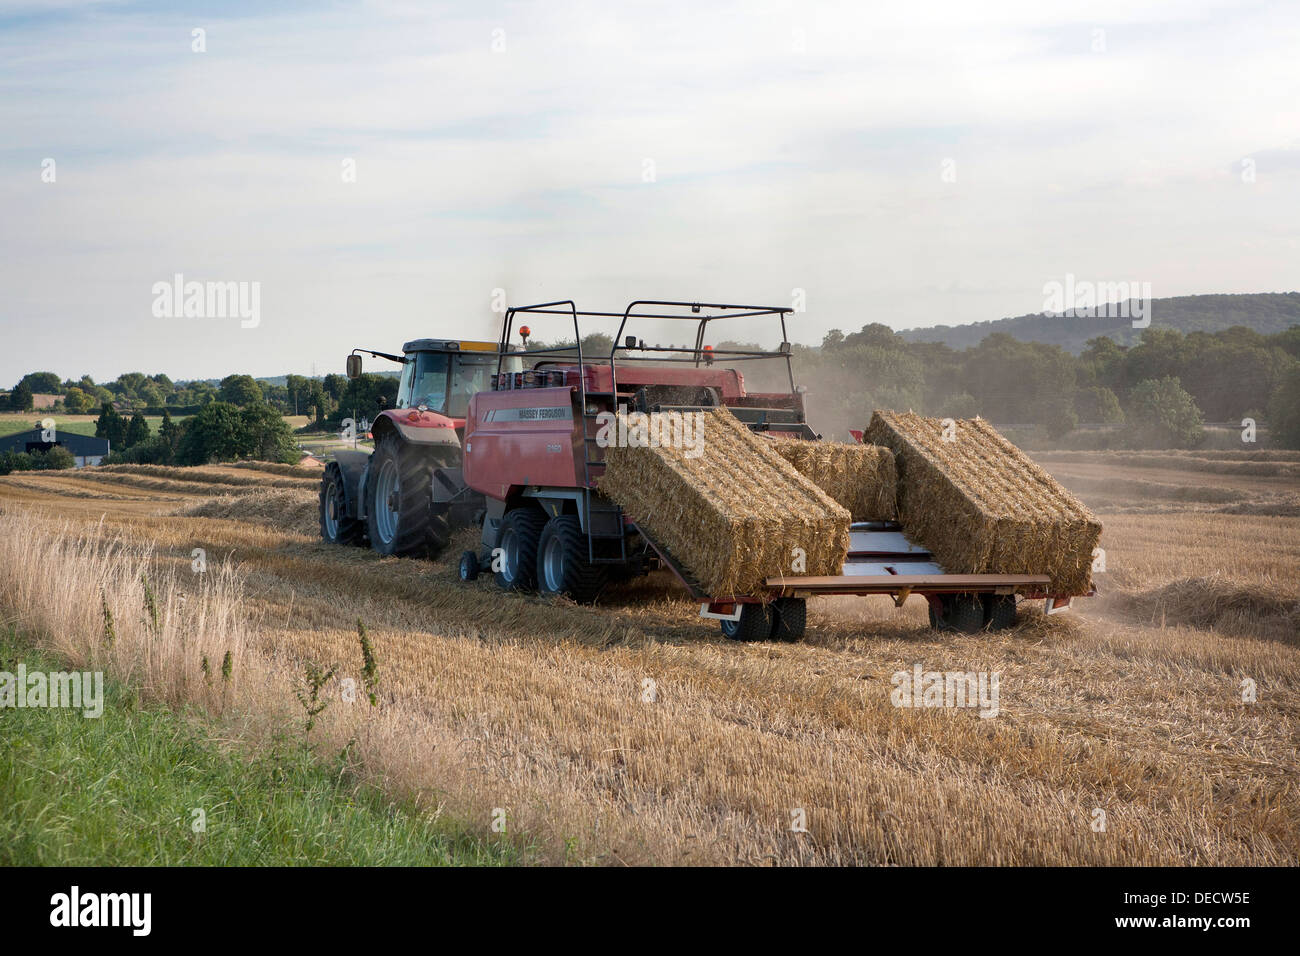 A red Massey Ferguson tractor and baler baling straw in open countryside. Stock Photo